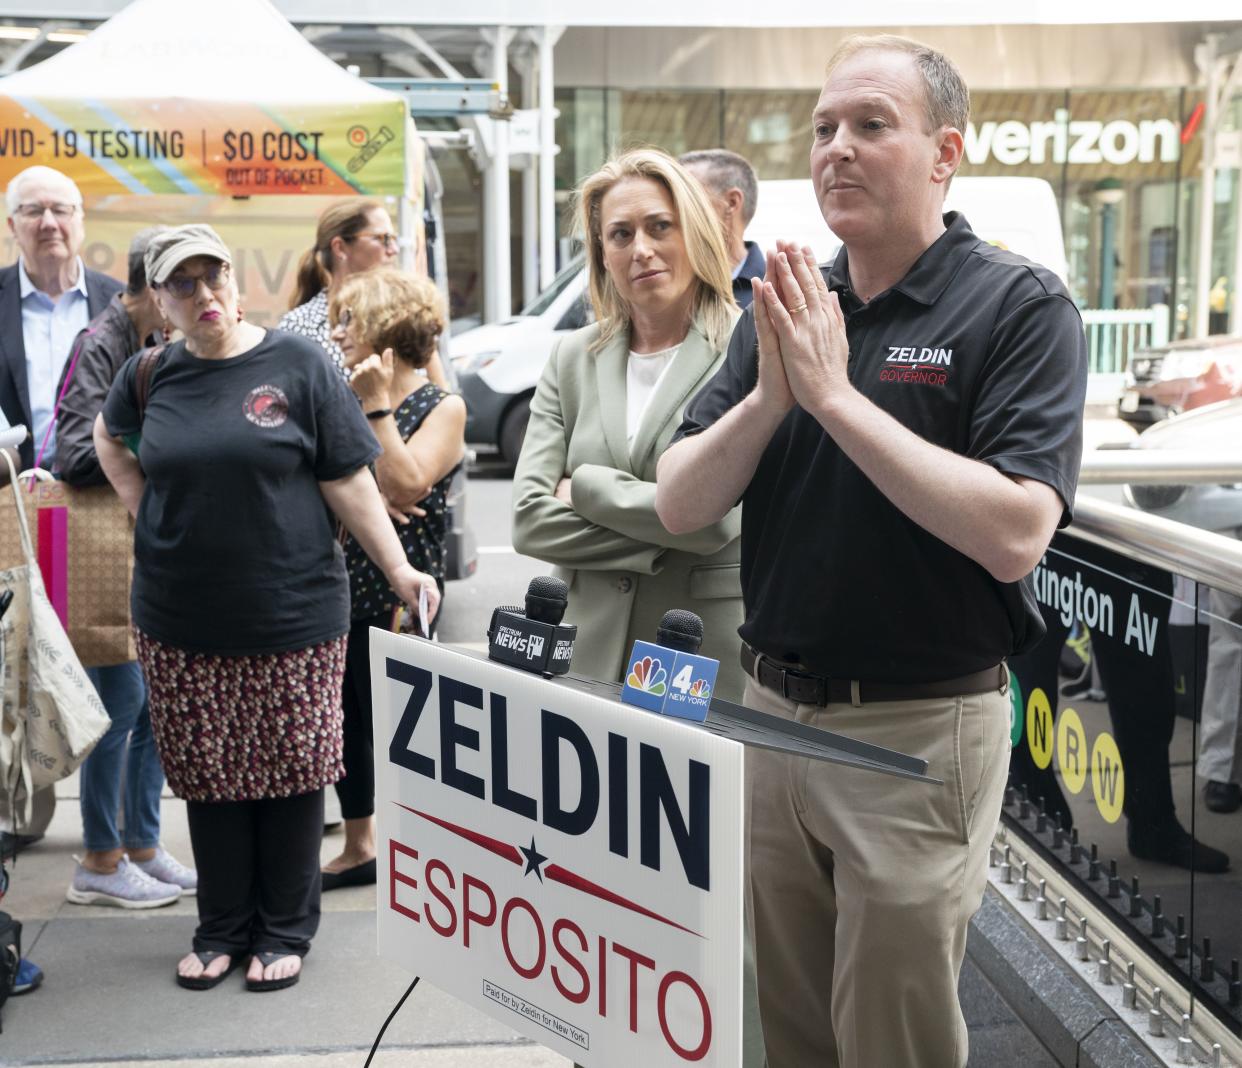 New York Republican candidate for governor Rep. Lee Zeldin (R-N.Y.) and Republican Lt. Gov. candidate Alison Esposito hold a press conference at Lexington Ave. and 59th St. Friday, Sept, 16, 2022, in Manhattan, New York.